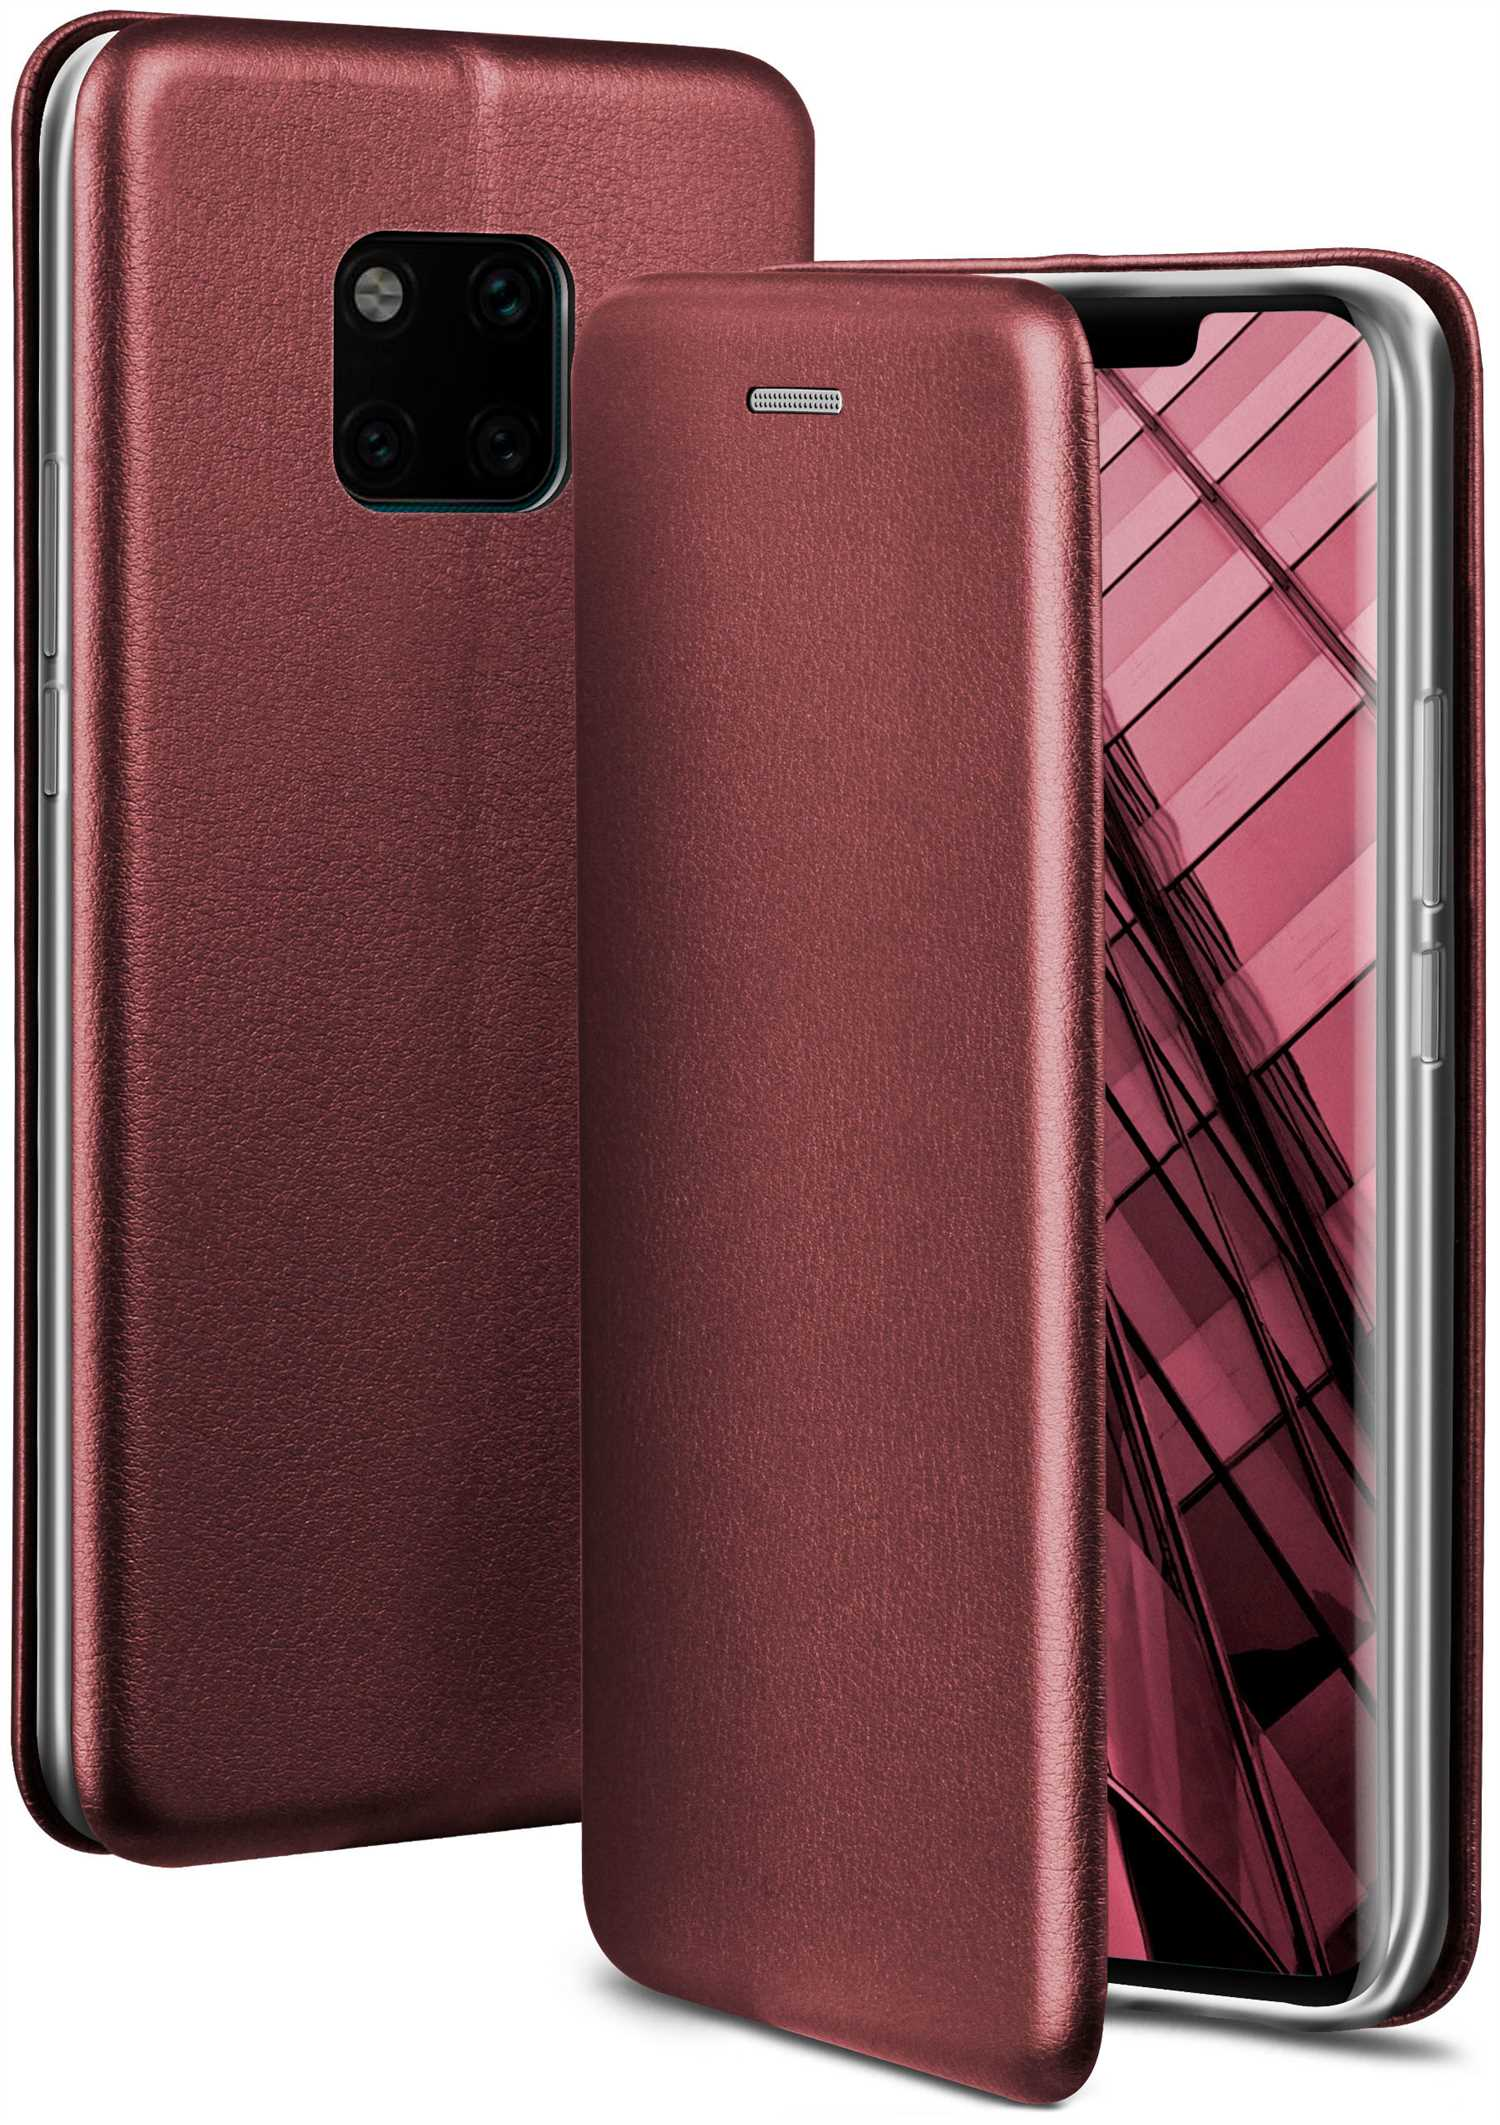 ONEFLOW Business Case, Flip Huawei, Cover, Mate Pro, - Red Burgund 20